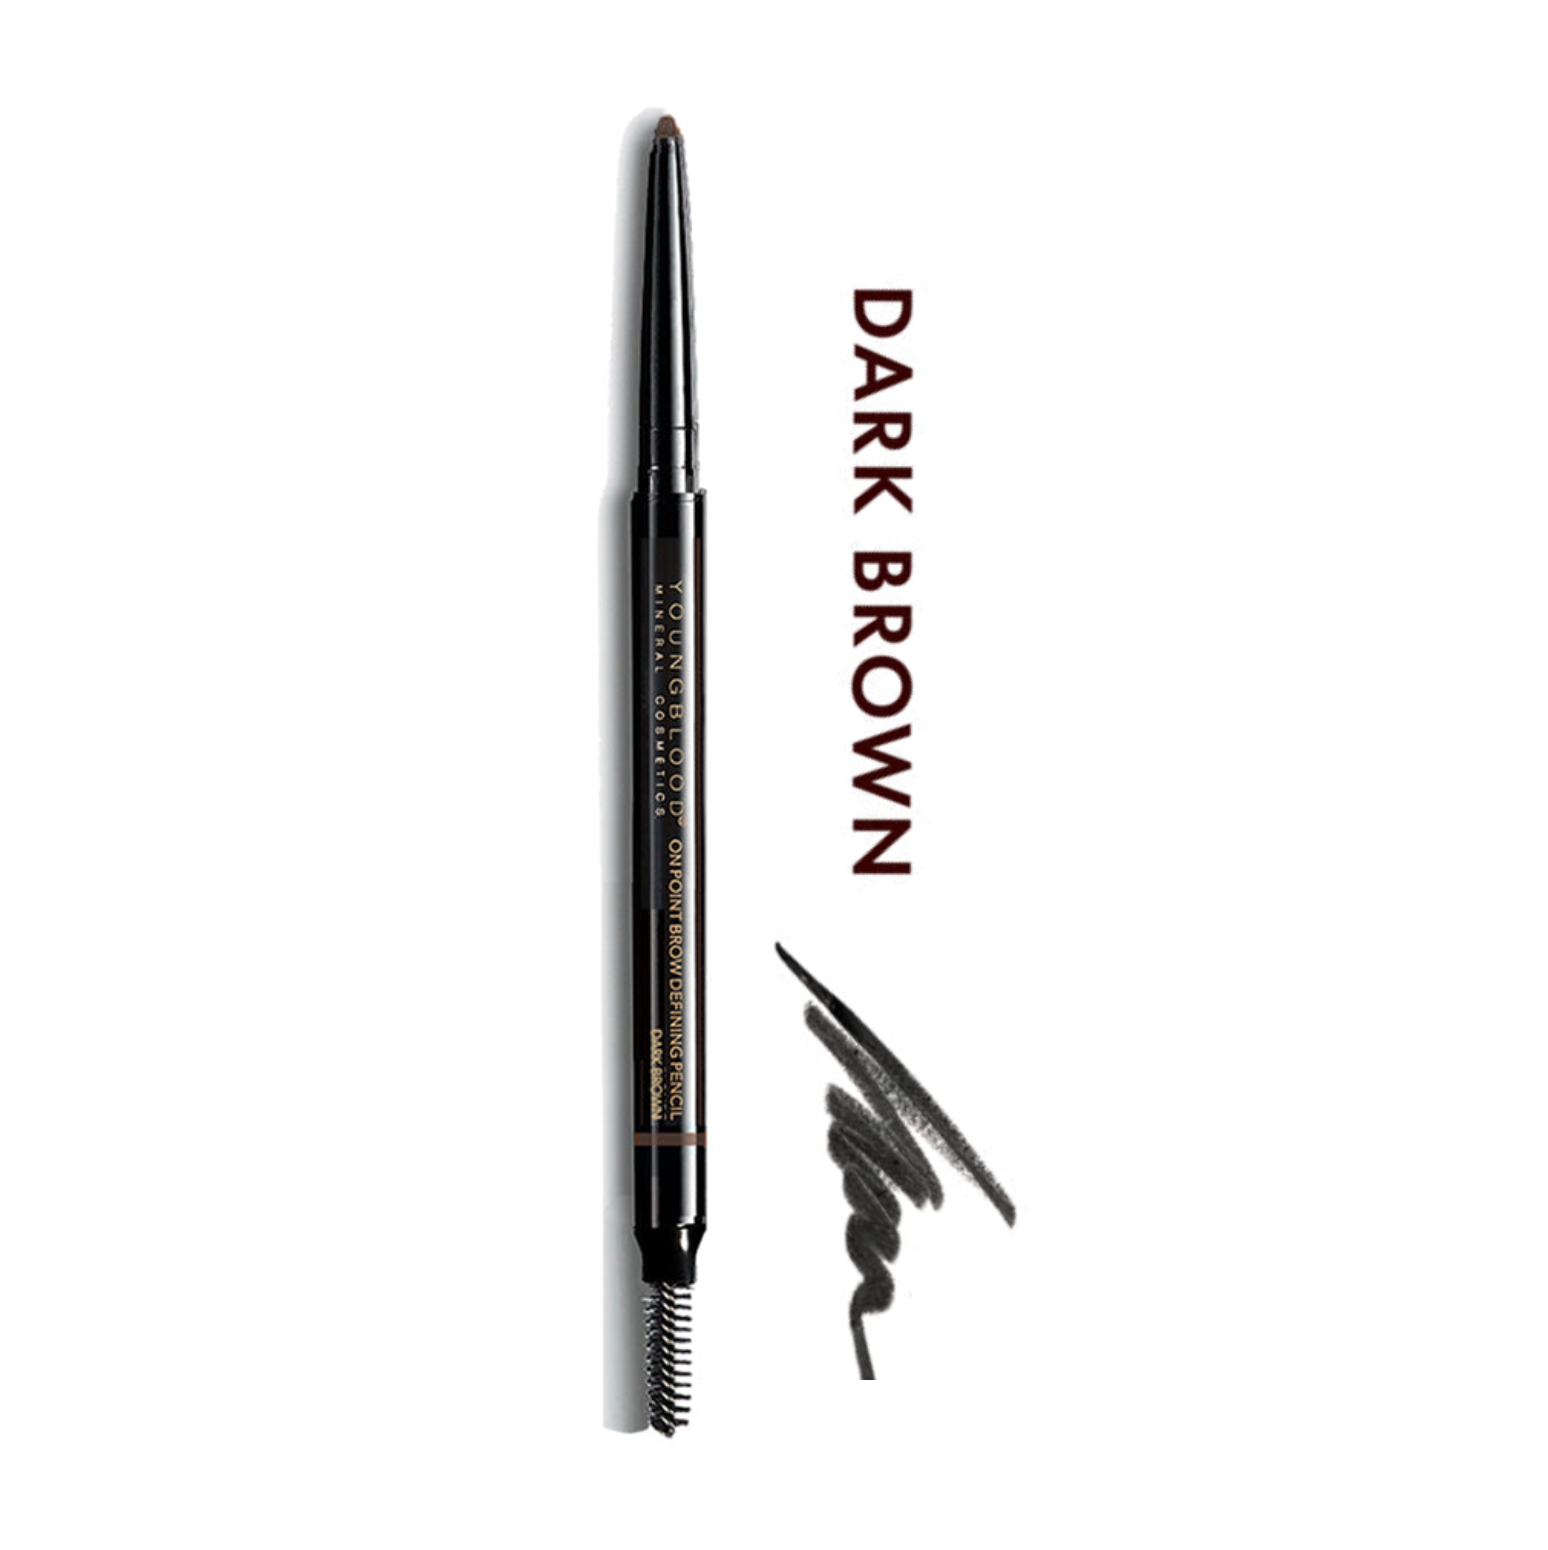 Youngblood On Point Brow Defining Pencil 0.35g - Dark Brown